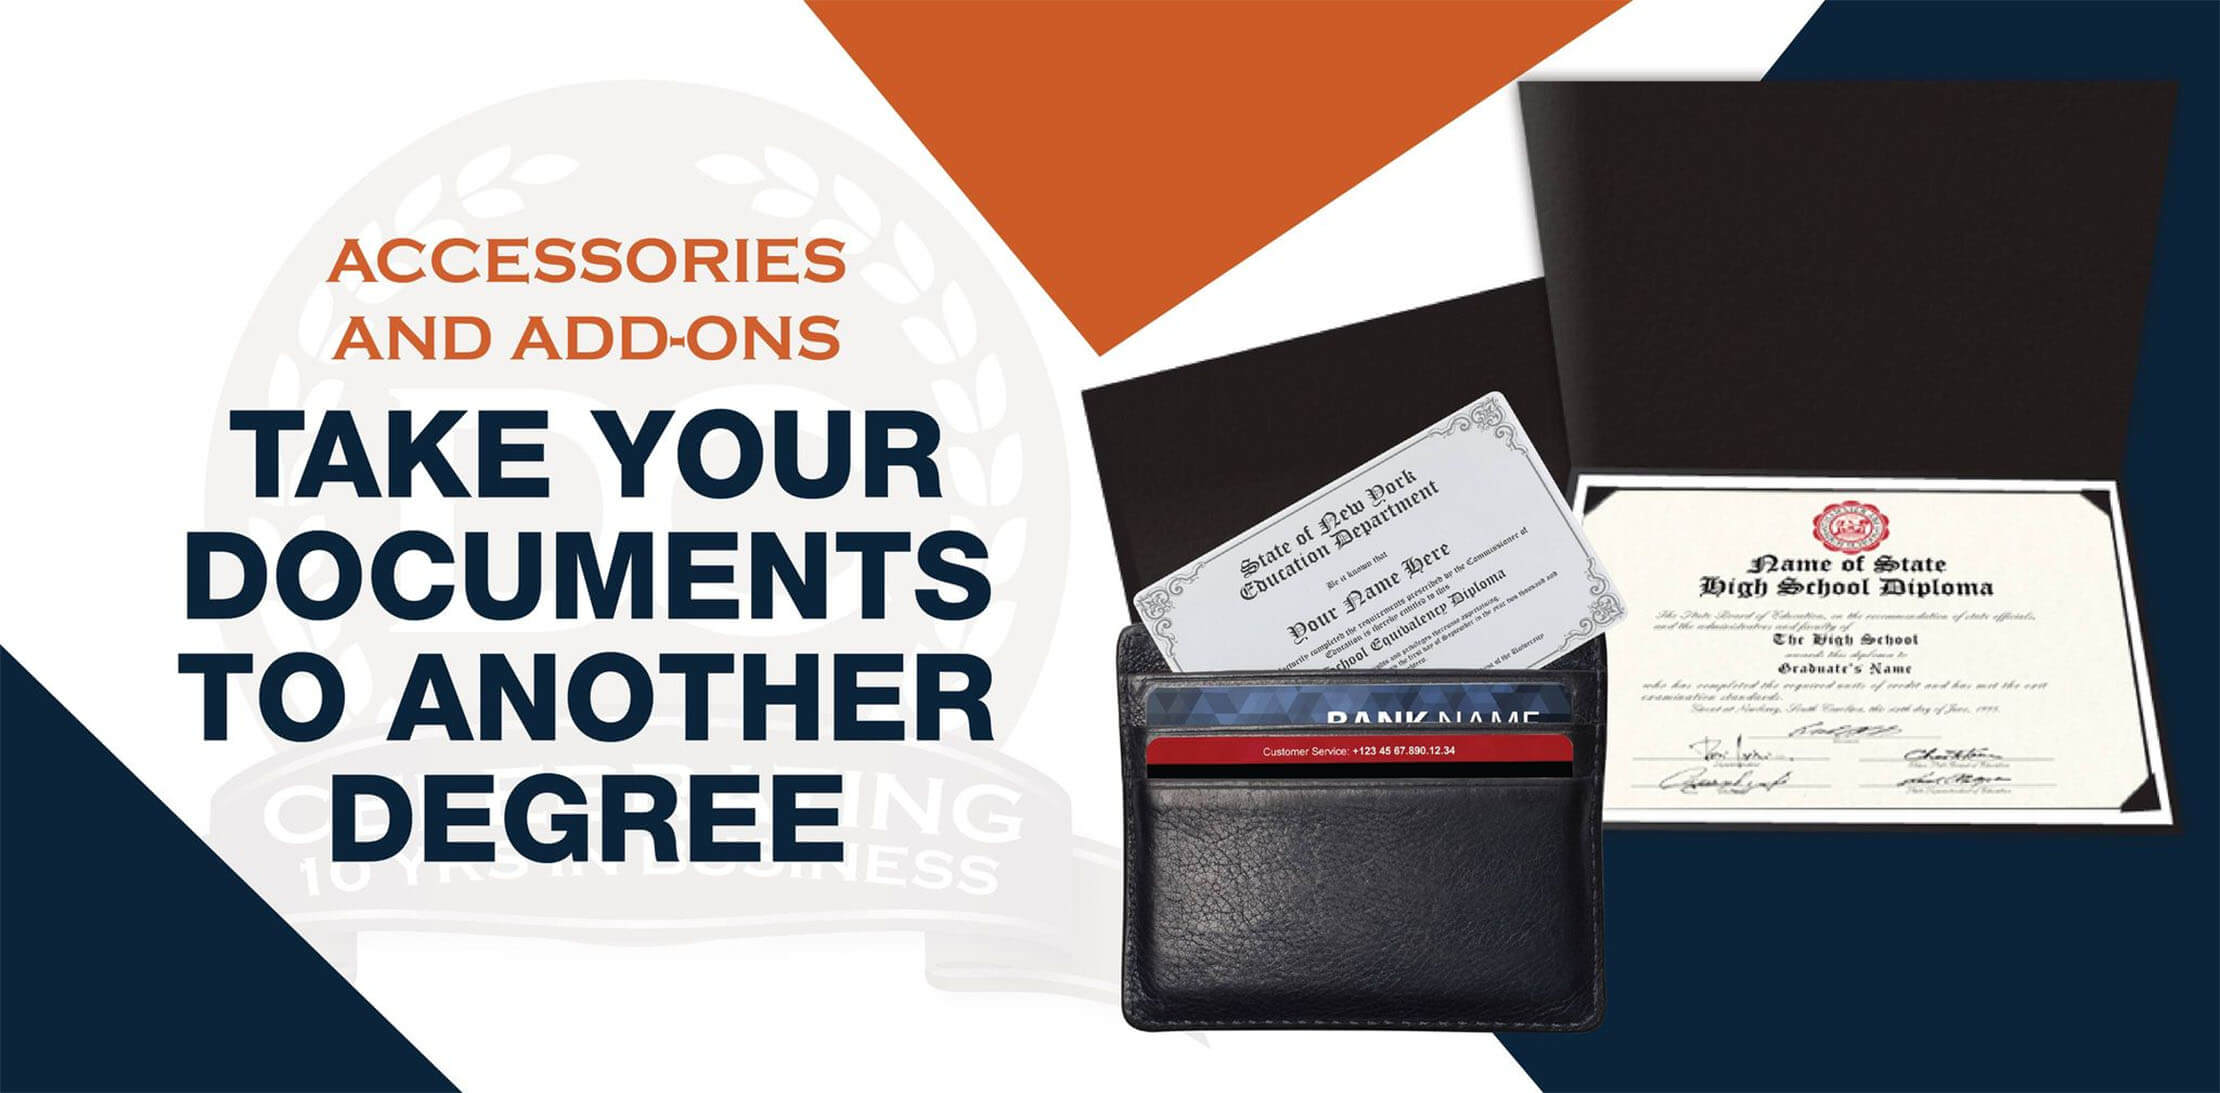 Find accessories to upgrade your Diploma Company print shop order! See our popular add-ons with buyers today. Enjoy fast shipping and guaranteed satisfaction!